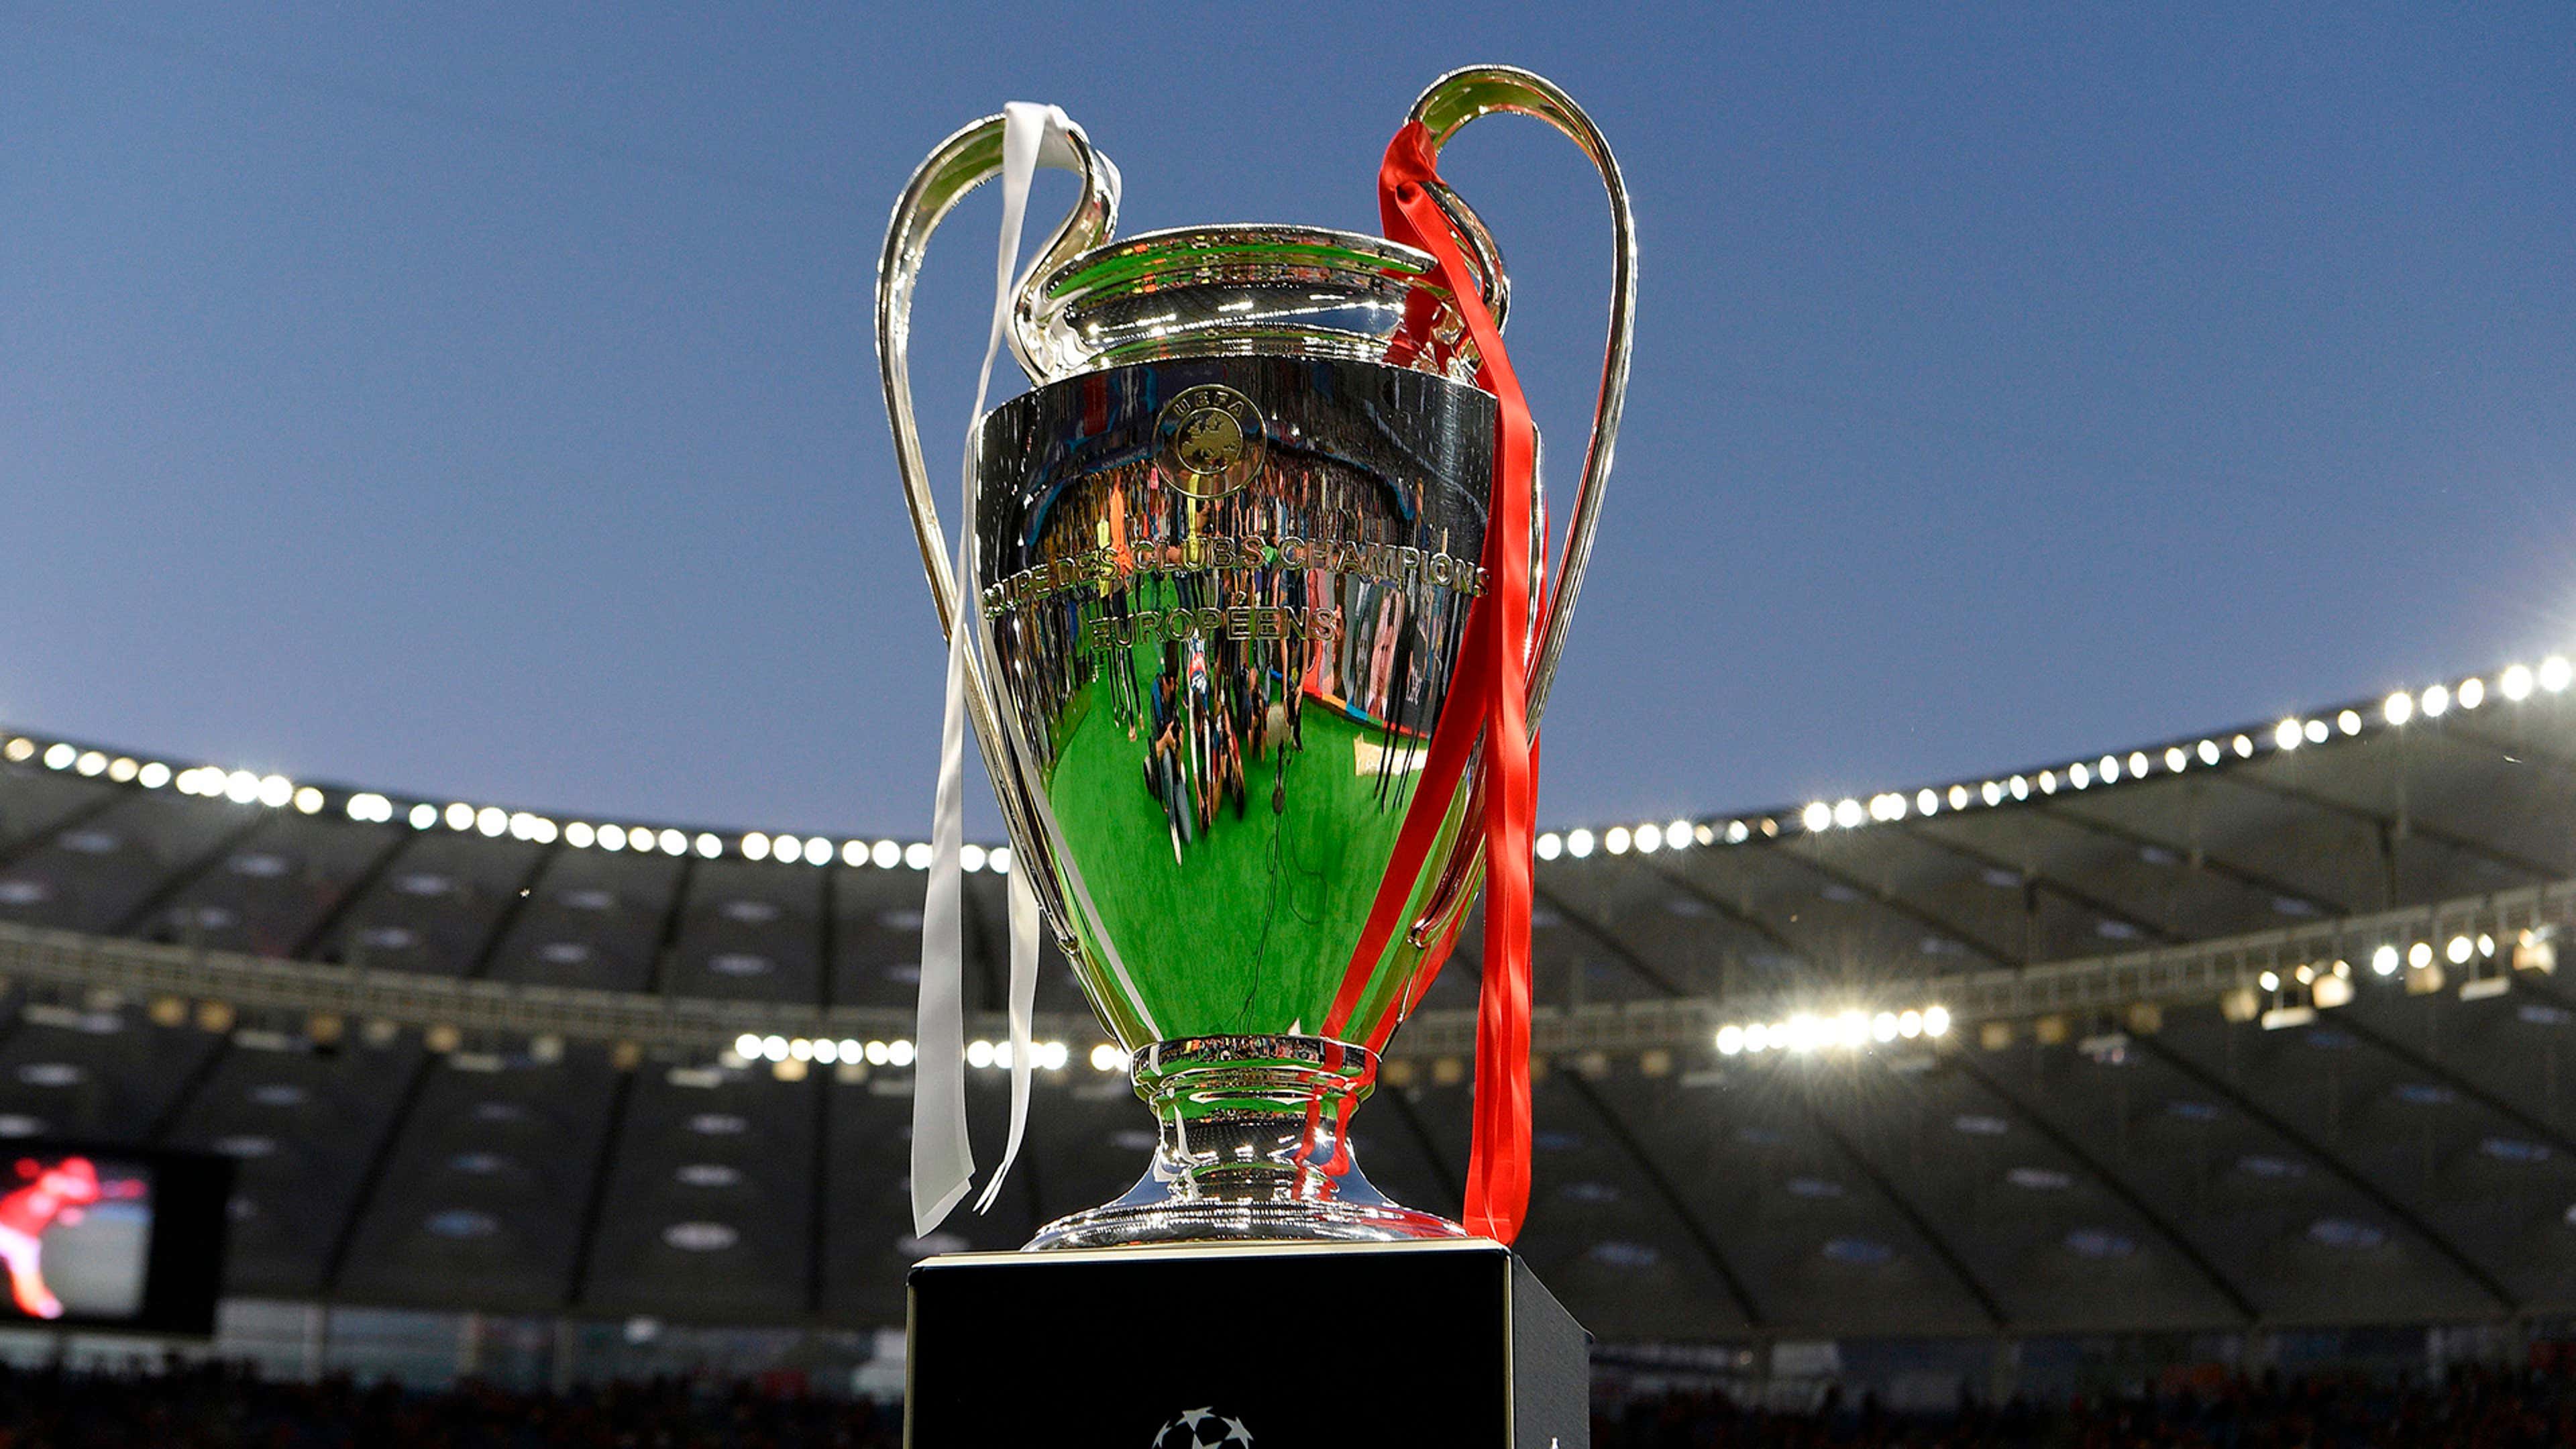 Which players have won the most Champions League titles?